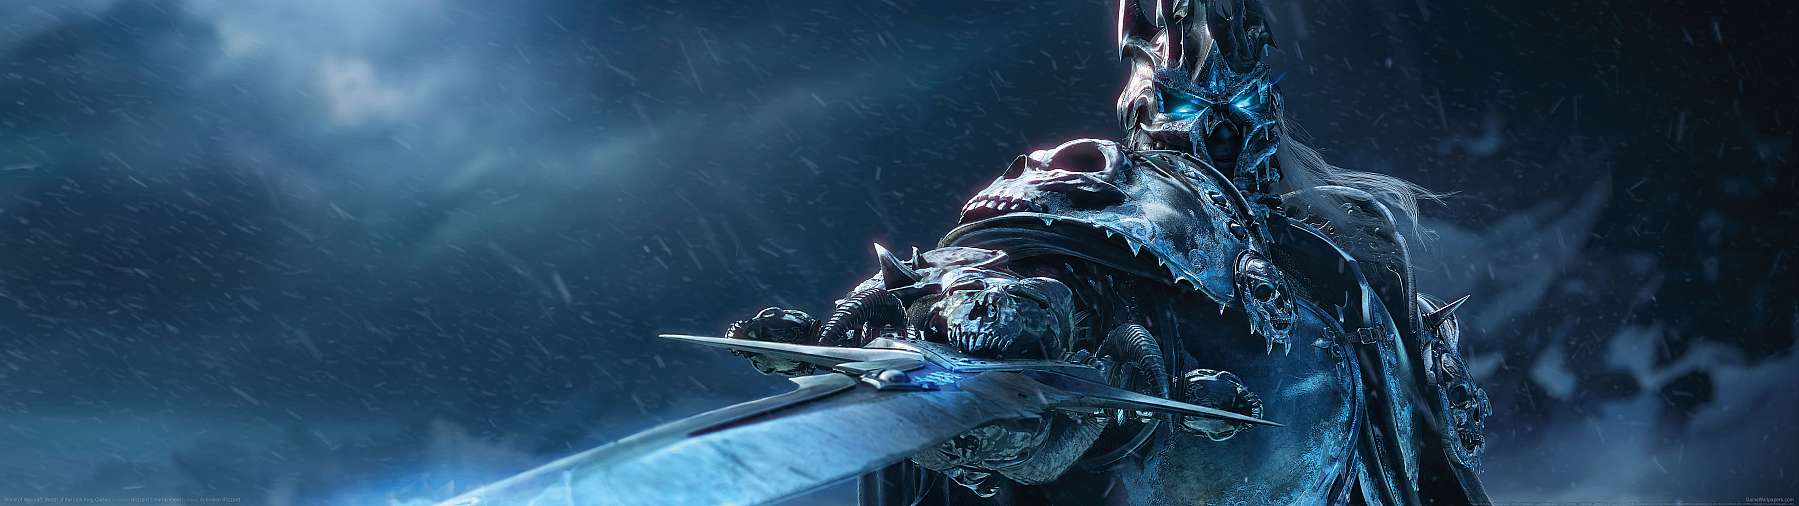 World of Warcraft: Wrath of the Lich King Classic wallpaper or background